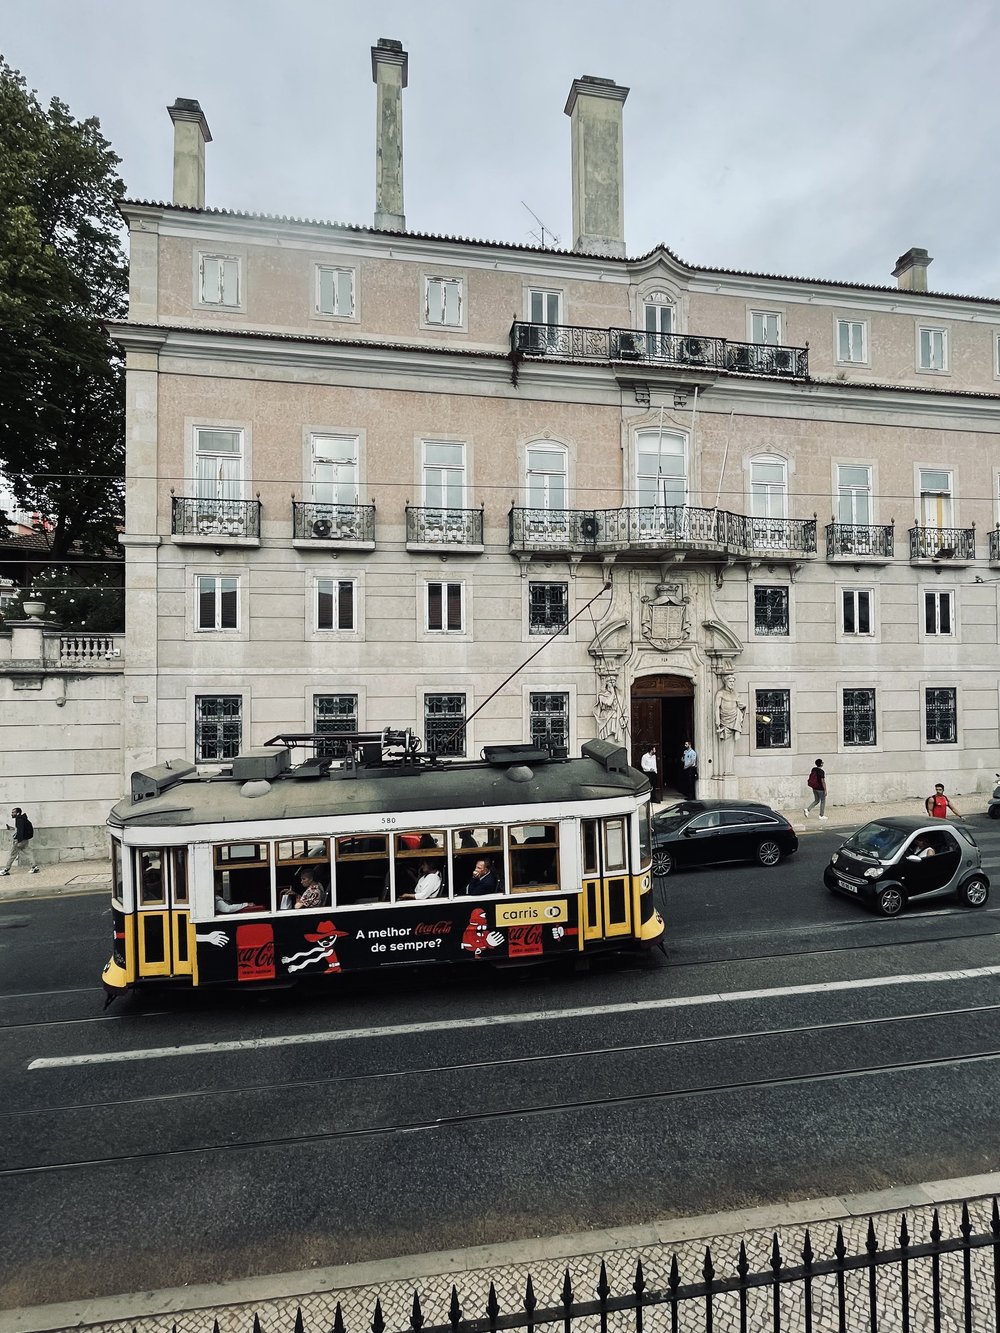 A city of hilly streets, Lisbon’s iconic tram